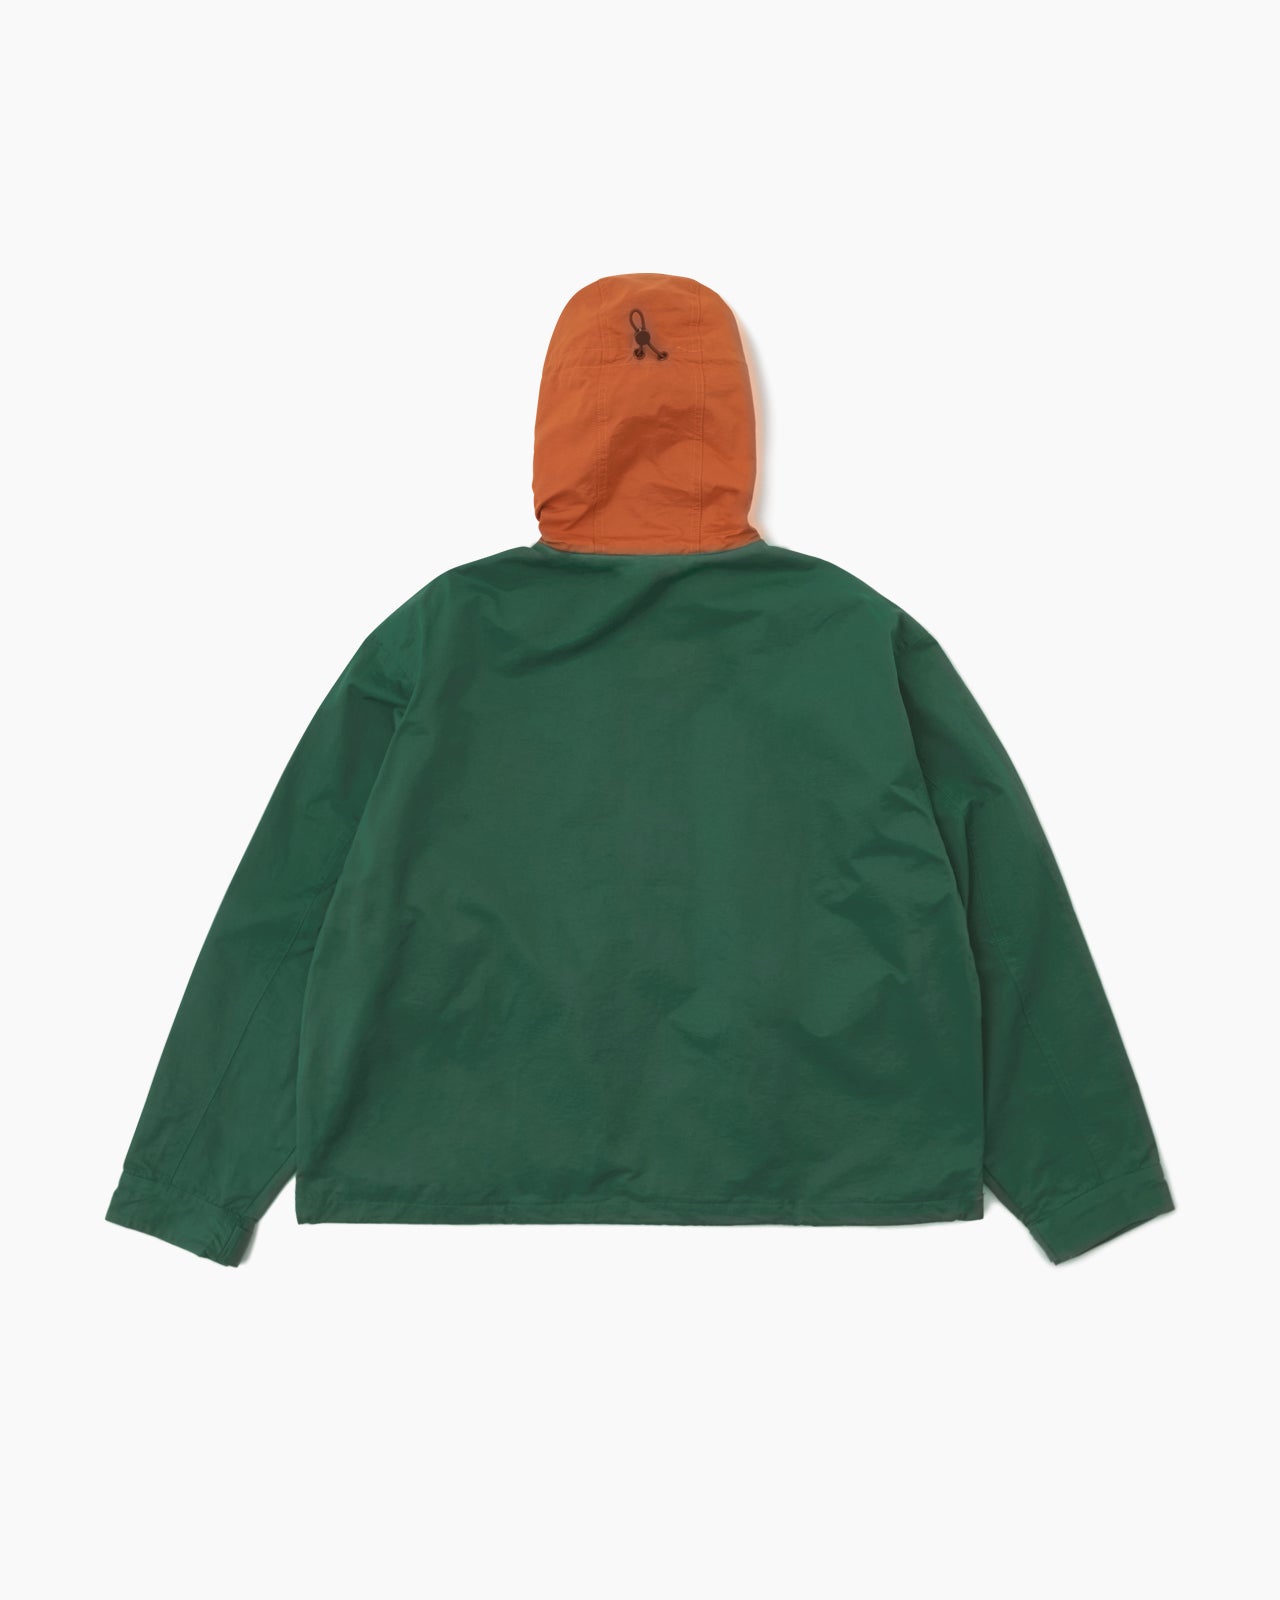 Cropped Hunting Jacket Green / Terracotta